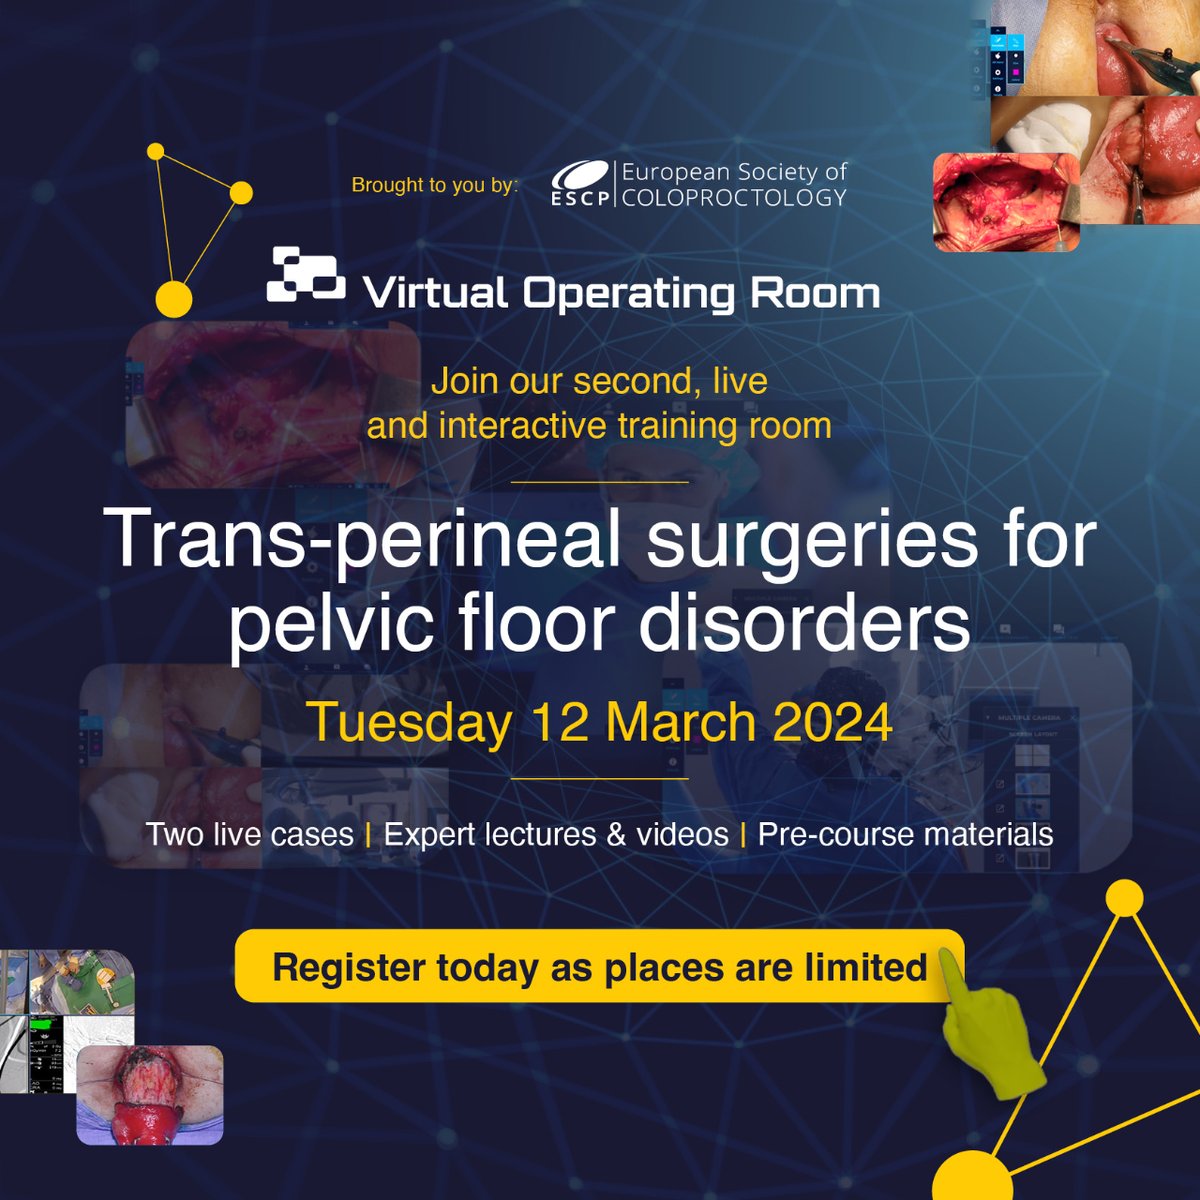 Join our second Virtual Operating Room event on Trans-Perineal Surgeries on 12 March!

Register today for live and interactive cases: i.mtr.cool/dzdmhgdstm

#PelvicFloorSurgery #LiveSurgery